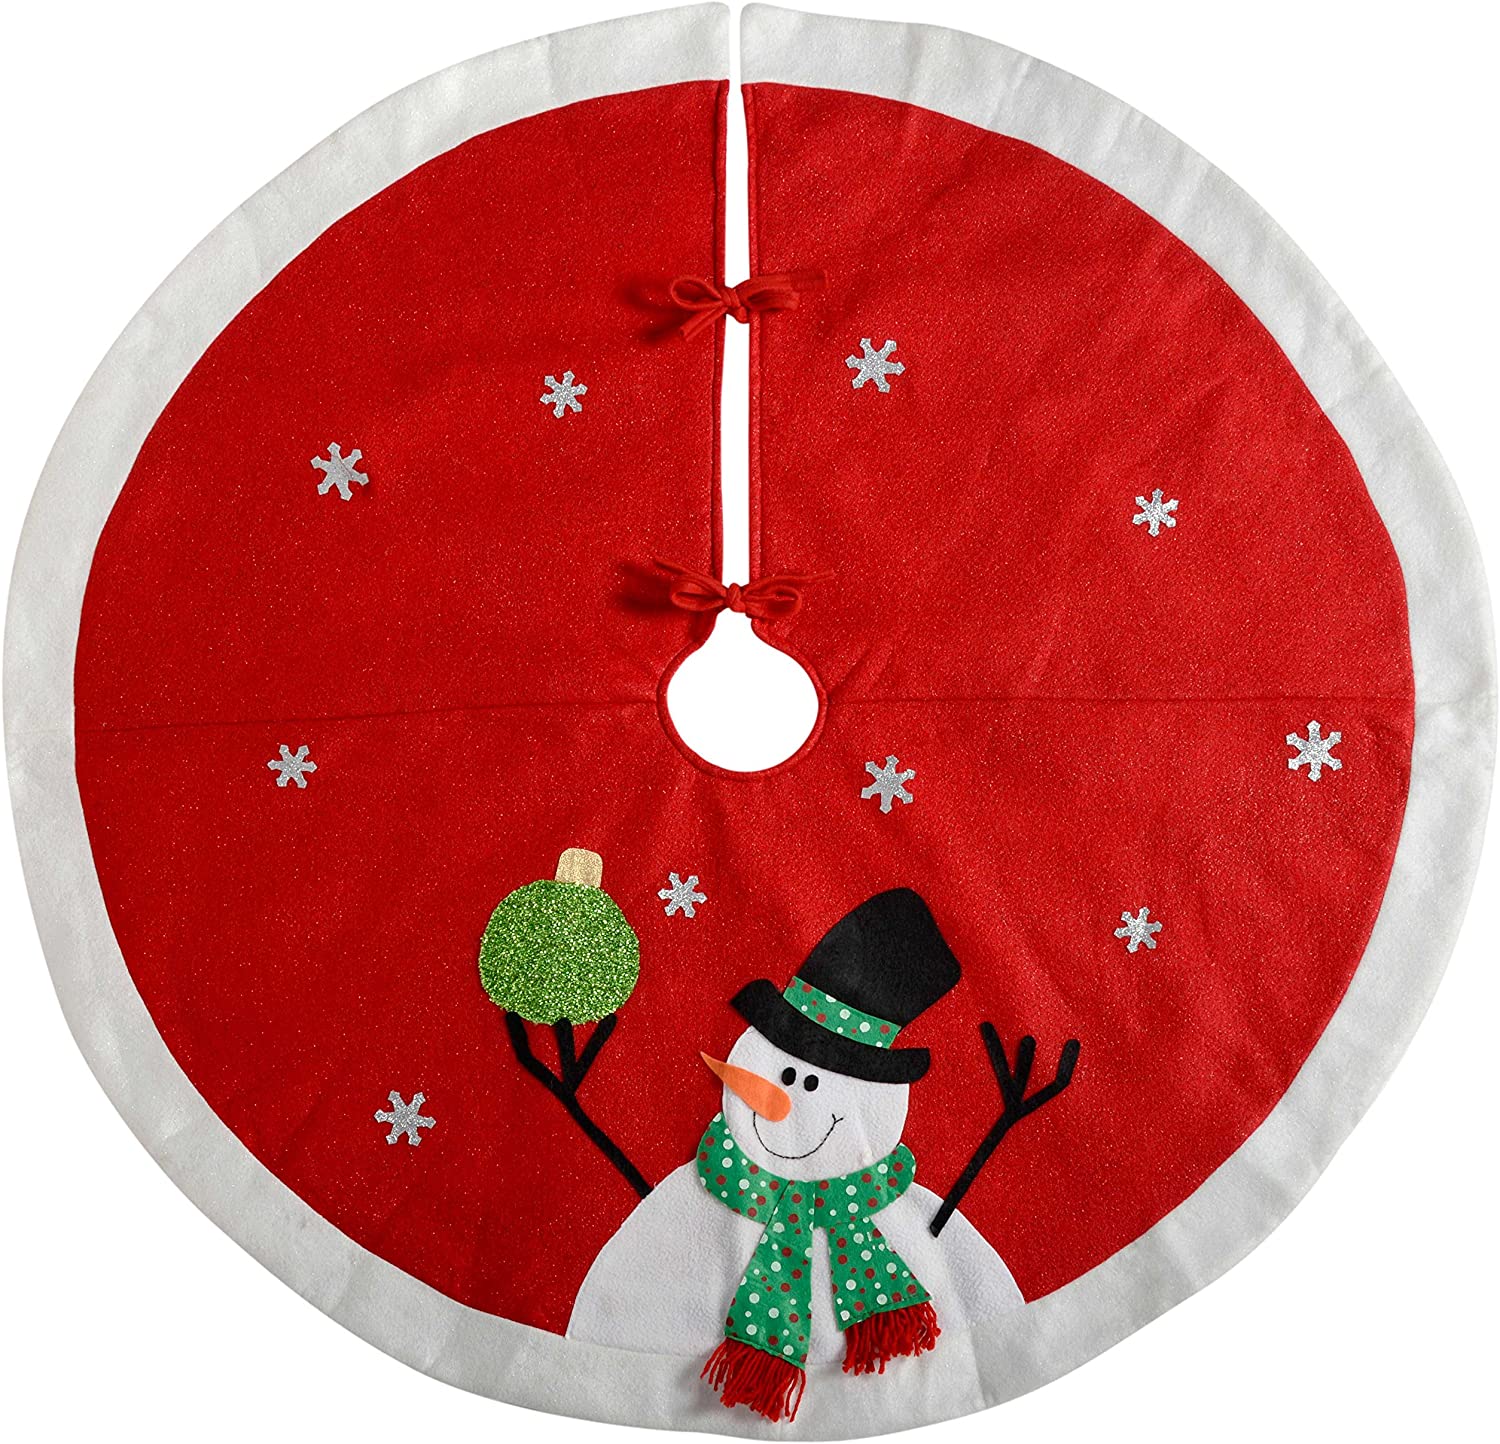 WeRChristmas Snowman Christmas Tree Skirt Decoration, Fabric, Red/White, 120 cm, Large